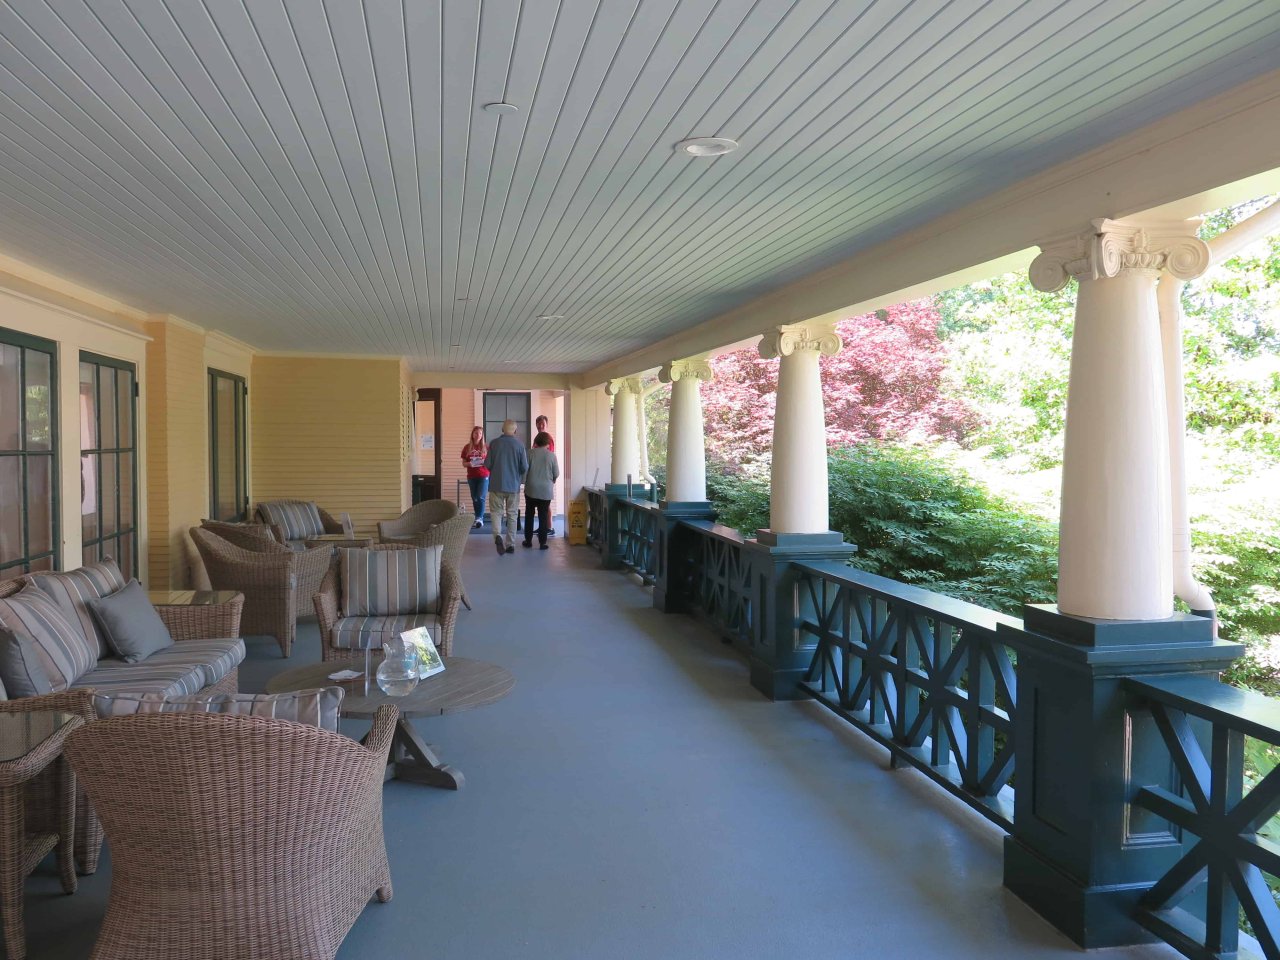 Porch at Crofton House, which was part of VHF's Heritage House Tour in 2019. Credit Judith Mosley